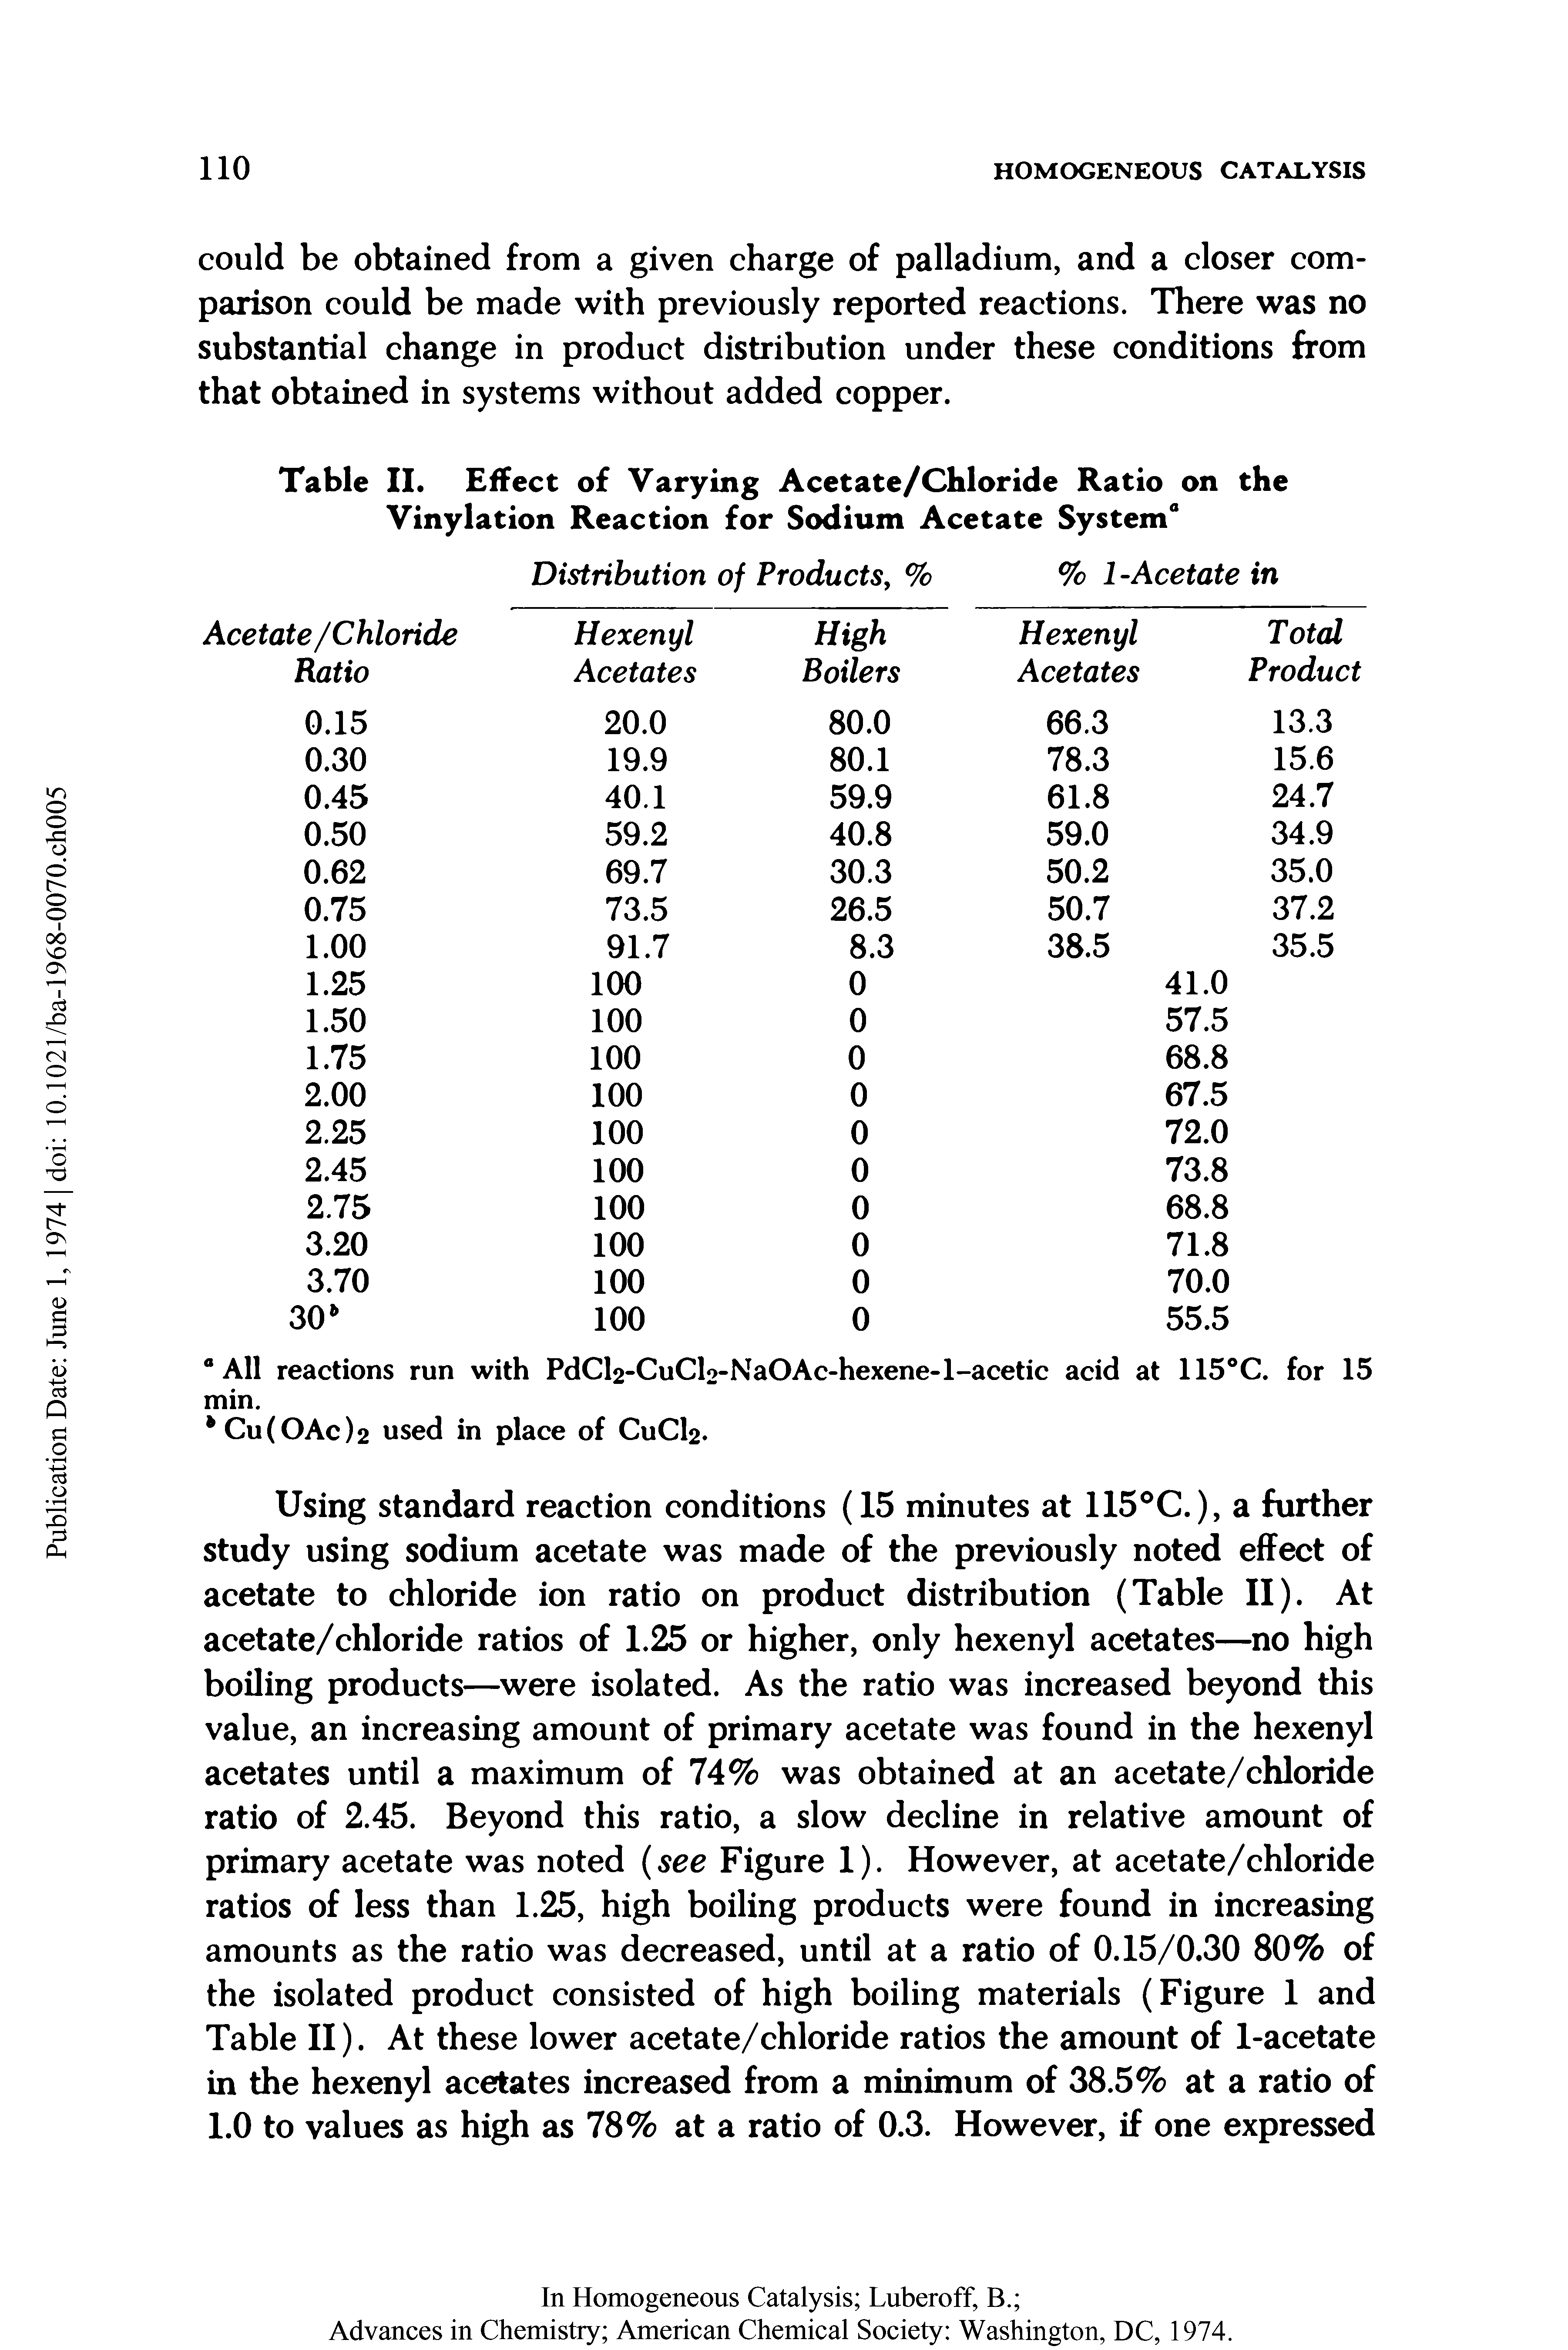 Table II. Effect of Varying Acetate/Chloride Ratio on the Vinylation Reaction for Sodium Acetate System"...